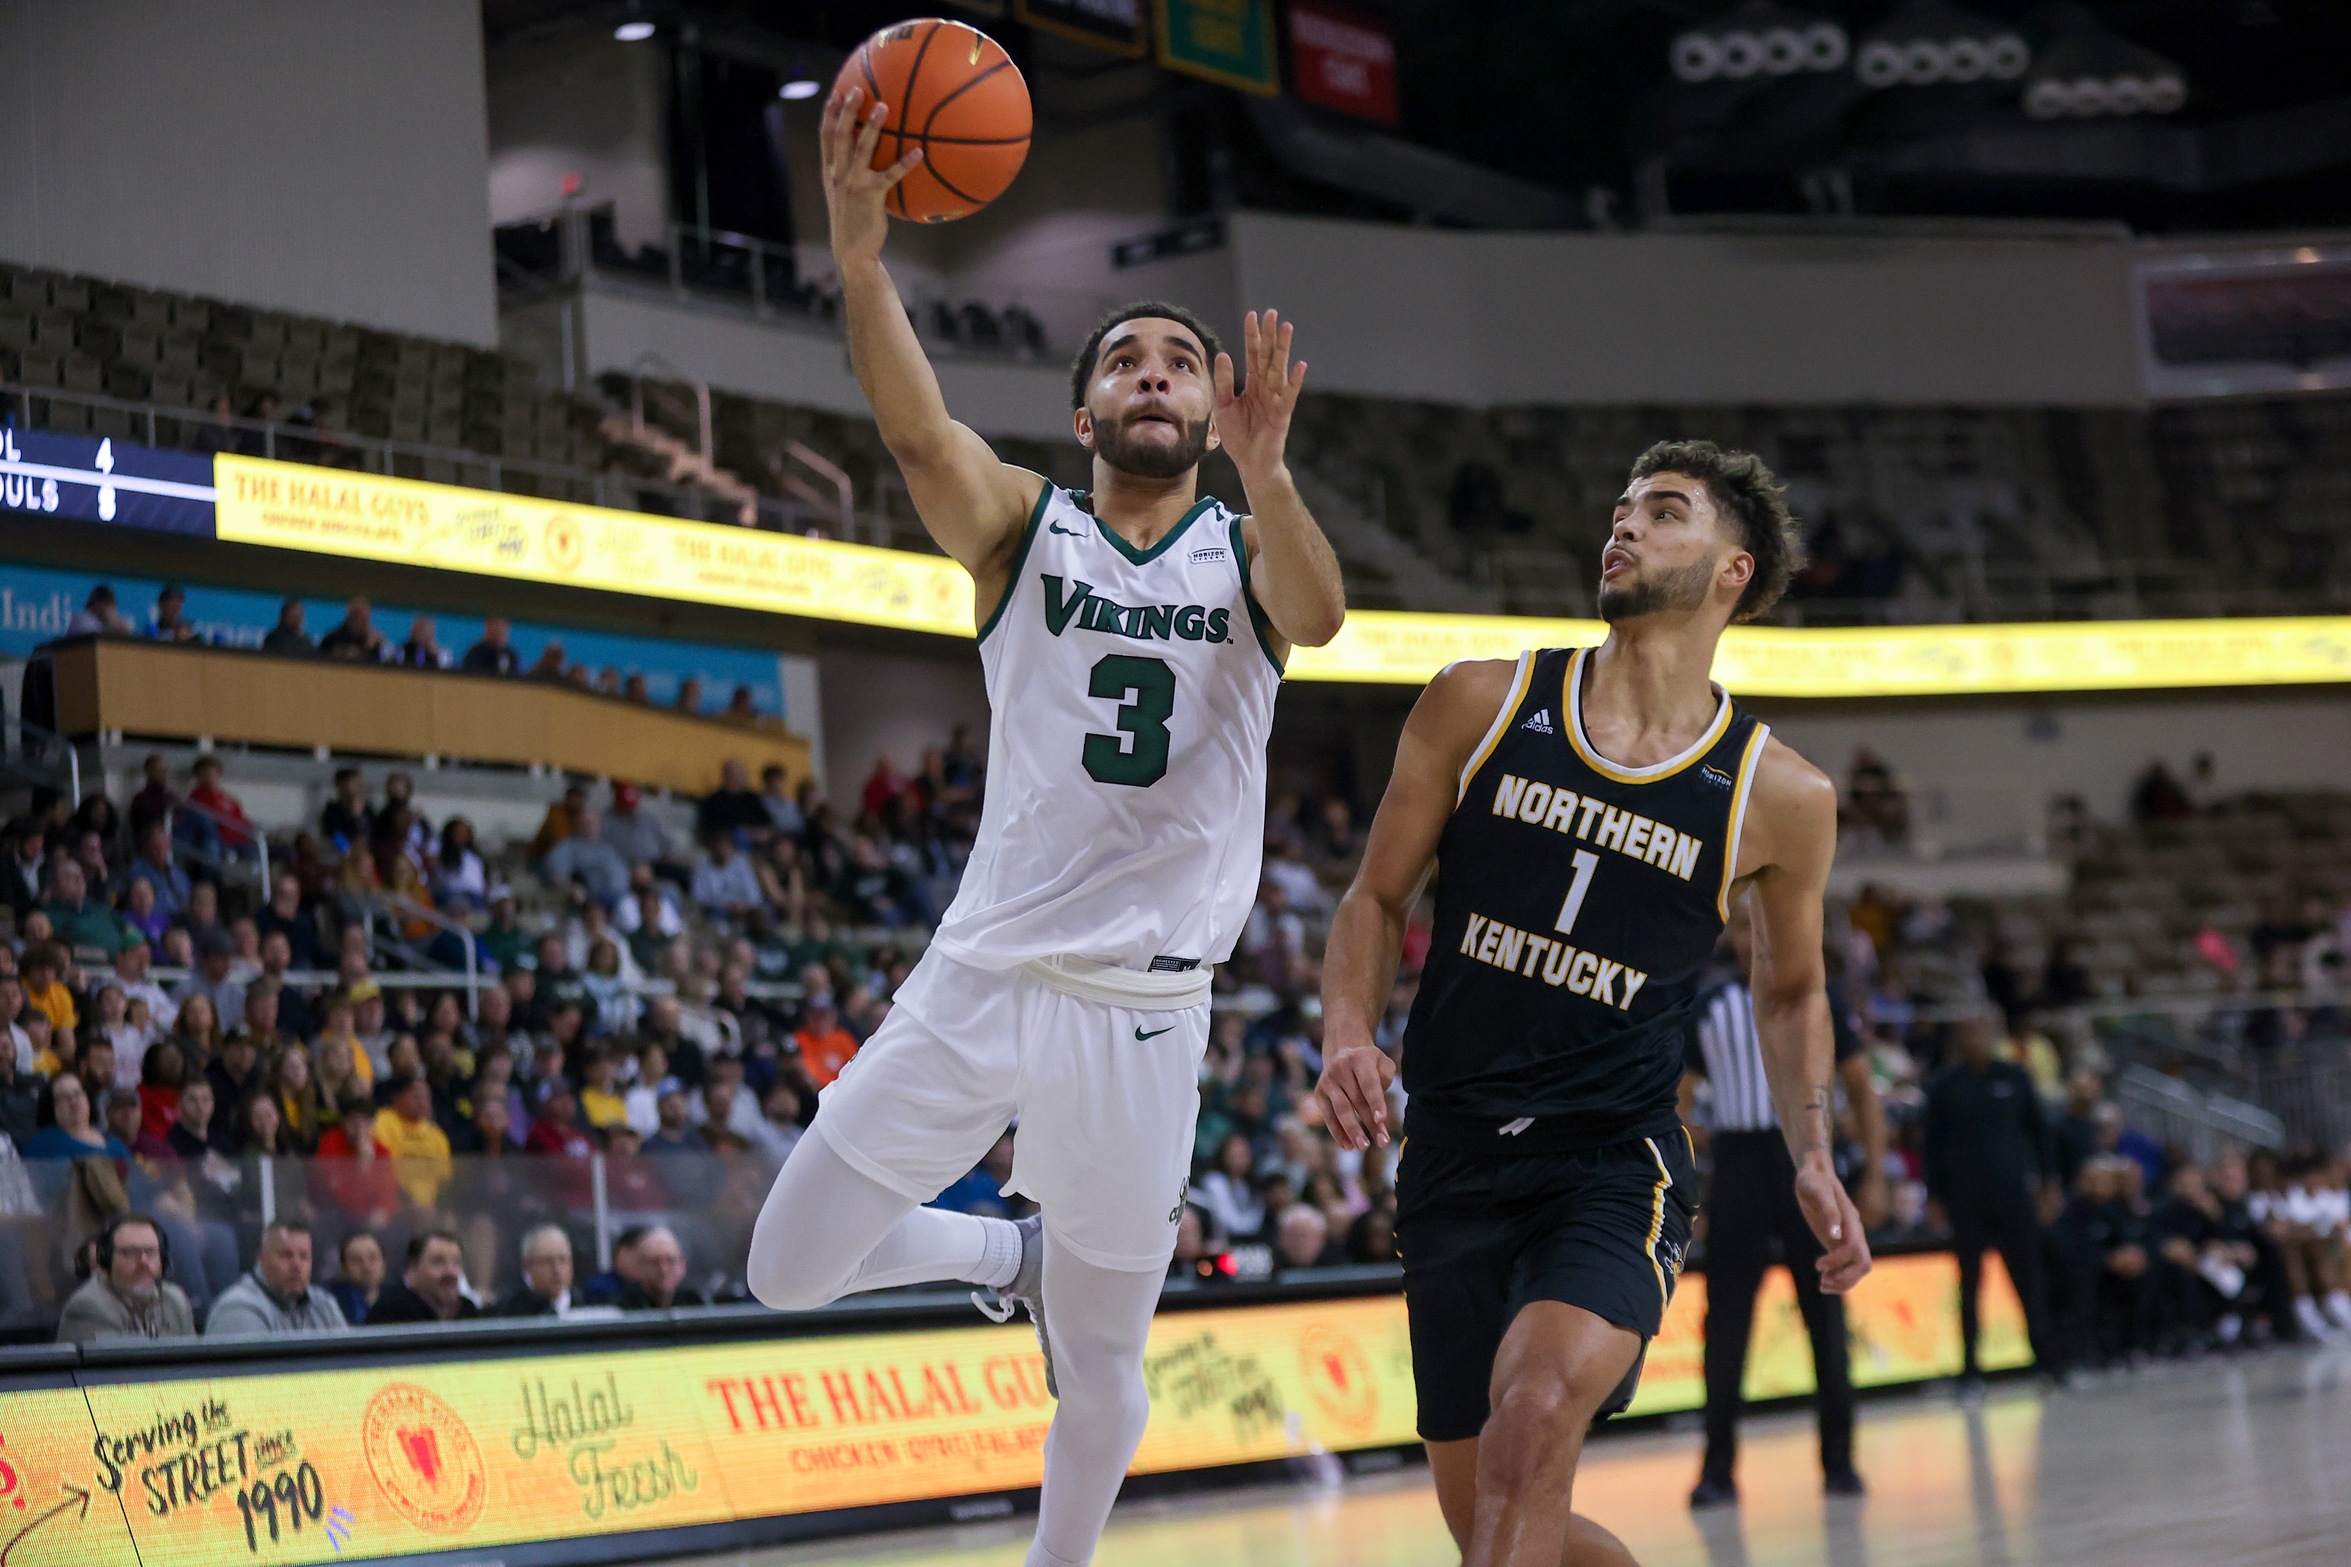 Cleveland State Men’s Basketball Falls to Northern Kentucky in #HLMBB Championship Game